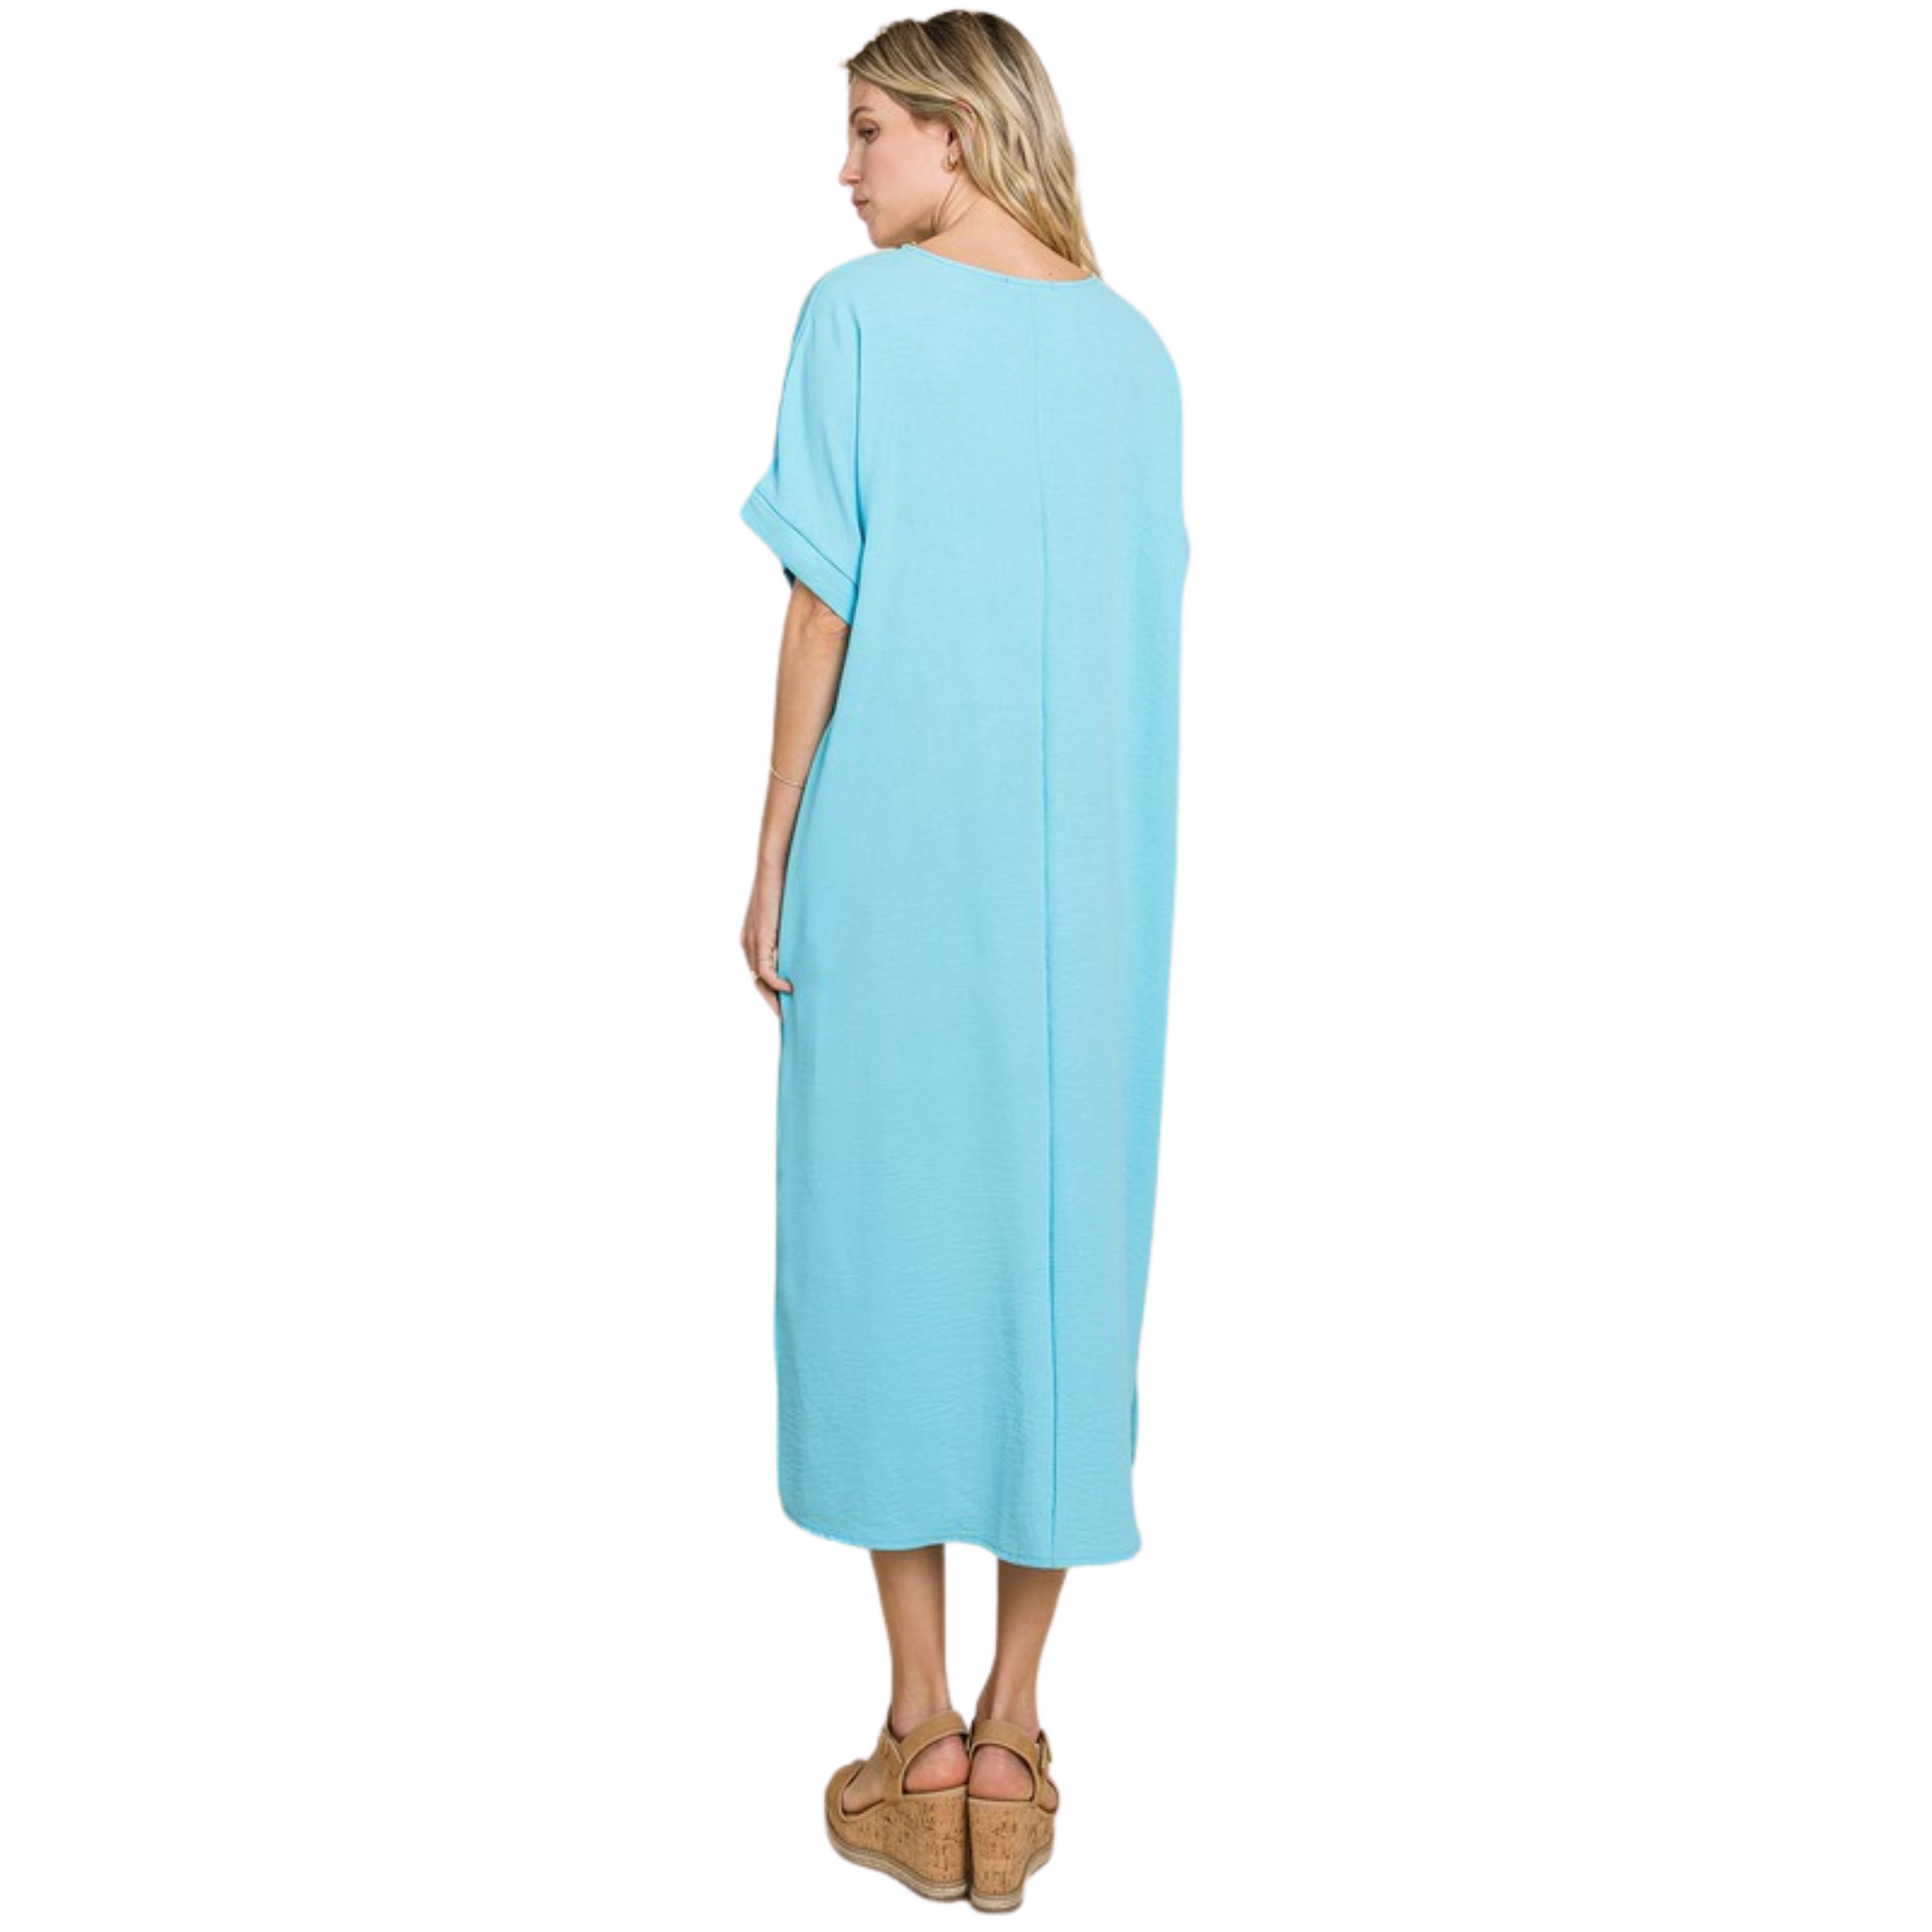 This aqua blue maxi dress features short sleeves, pockets, and lightweight fabric. It provides comfort and convenience, allowing you to carry all of your belongings with you while still feeling light and stylish.